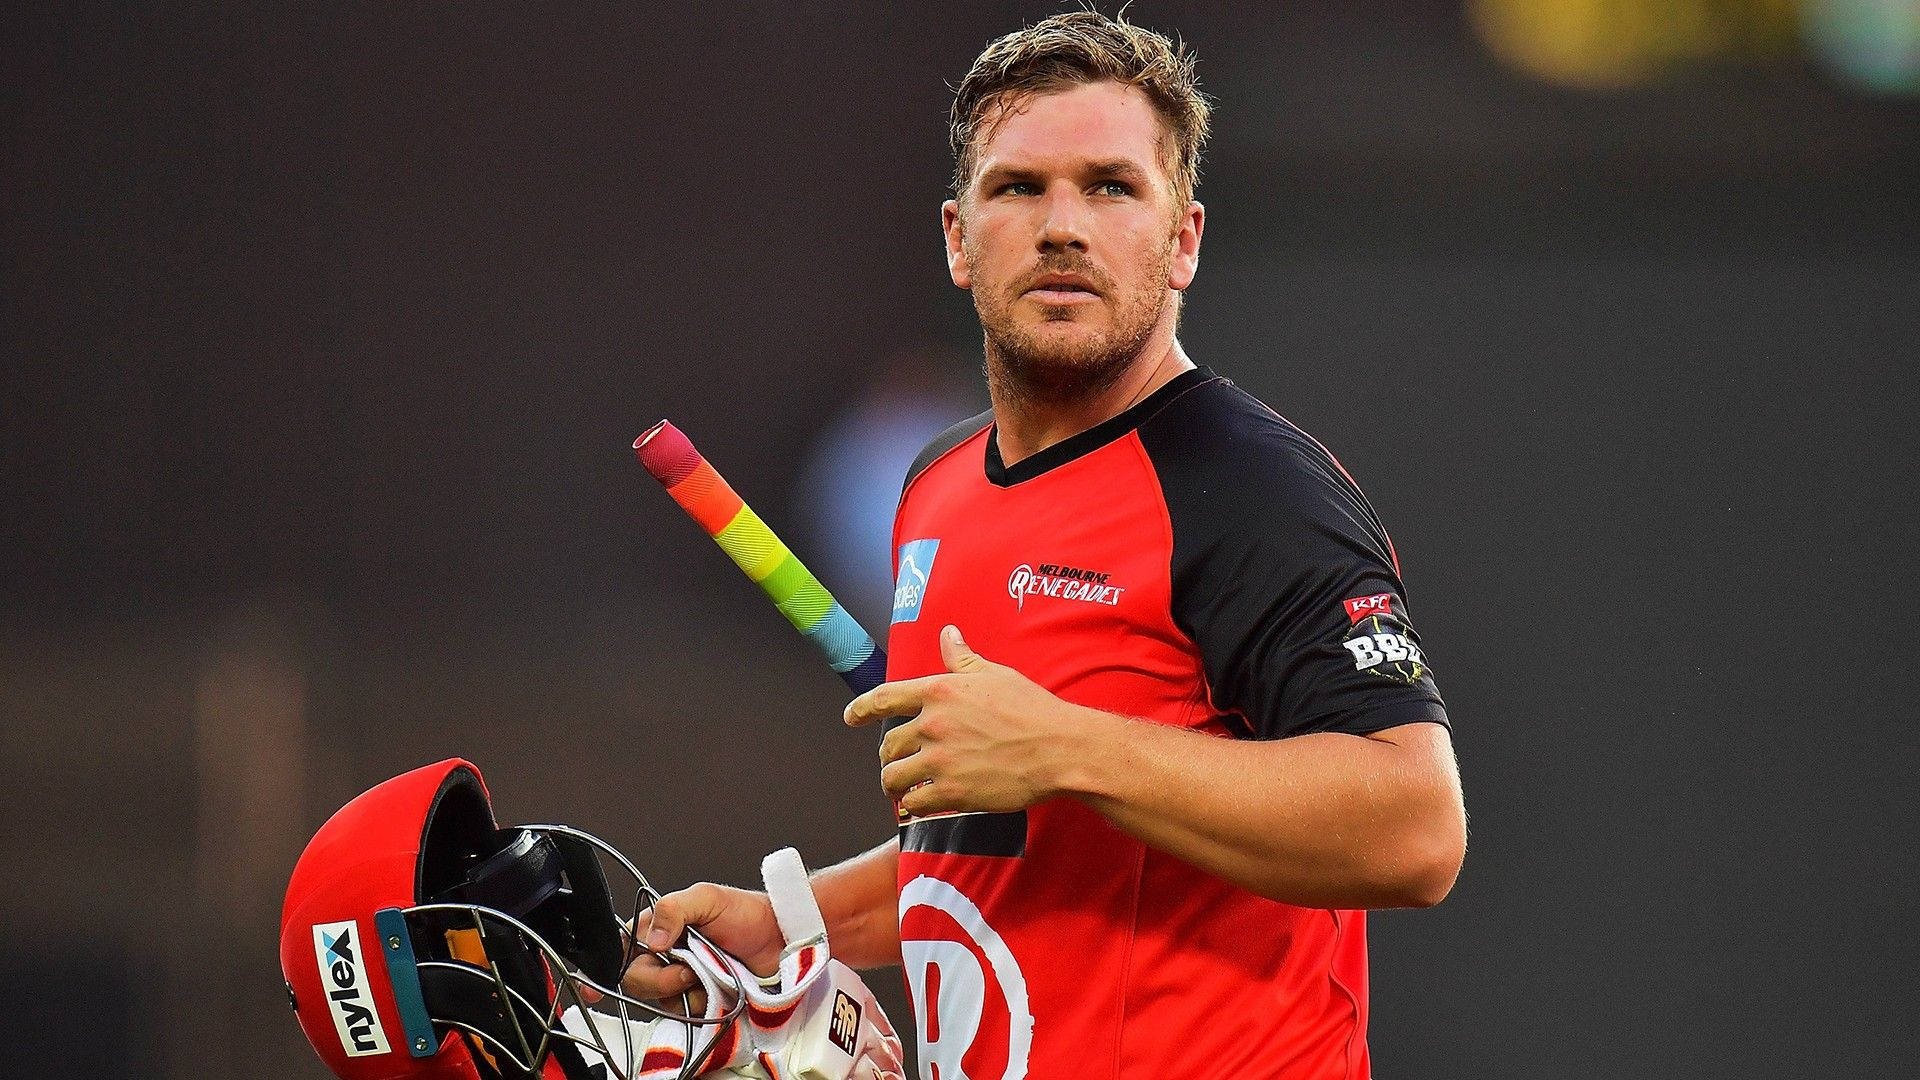 Aaron Finch Professional Cricketer